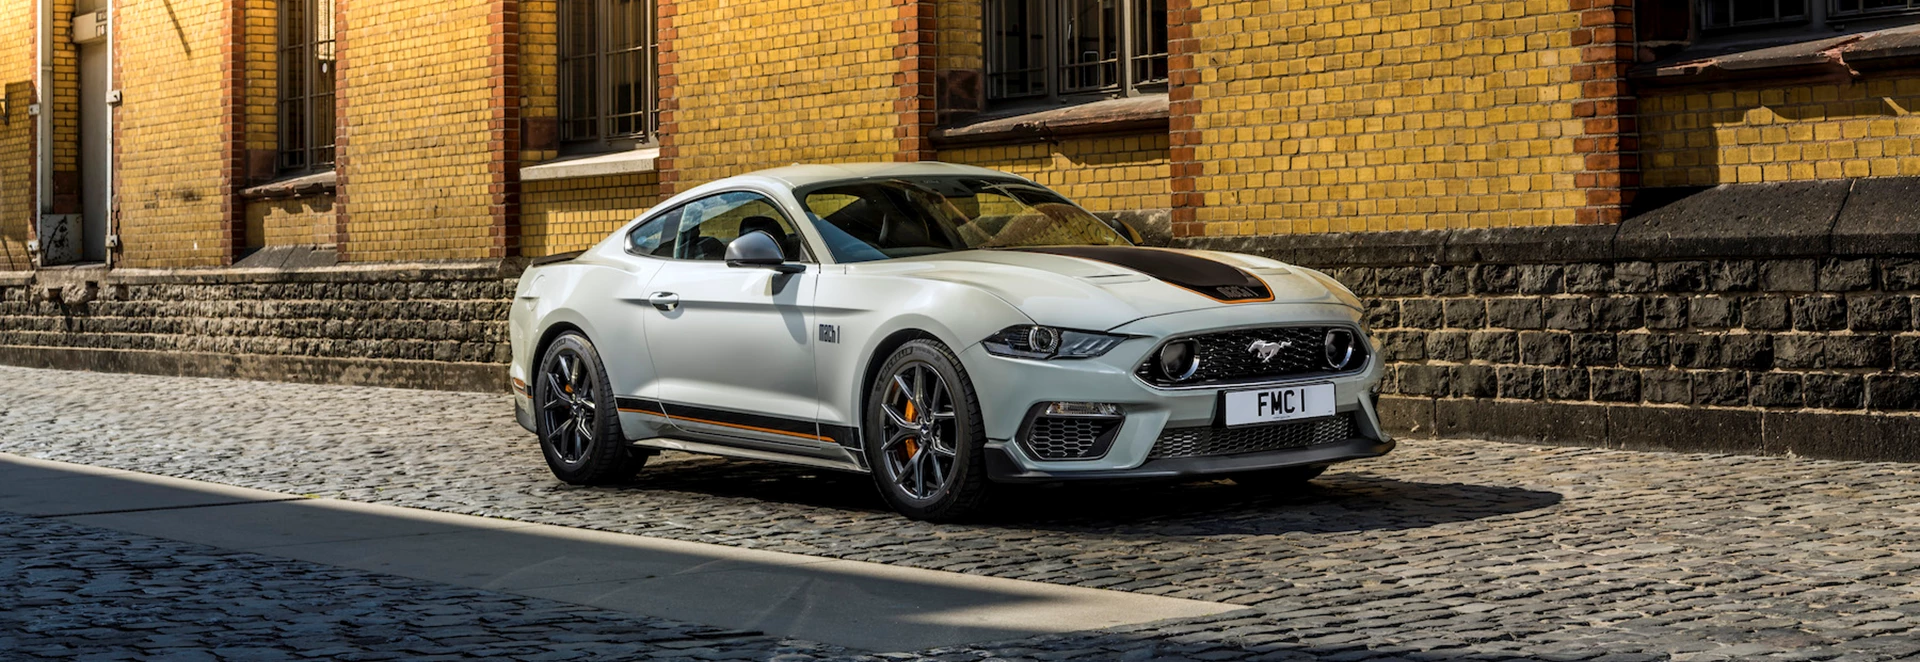 Ford’s new Mustang Mach 1 to arrive in the UK this summer 